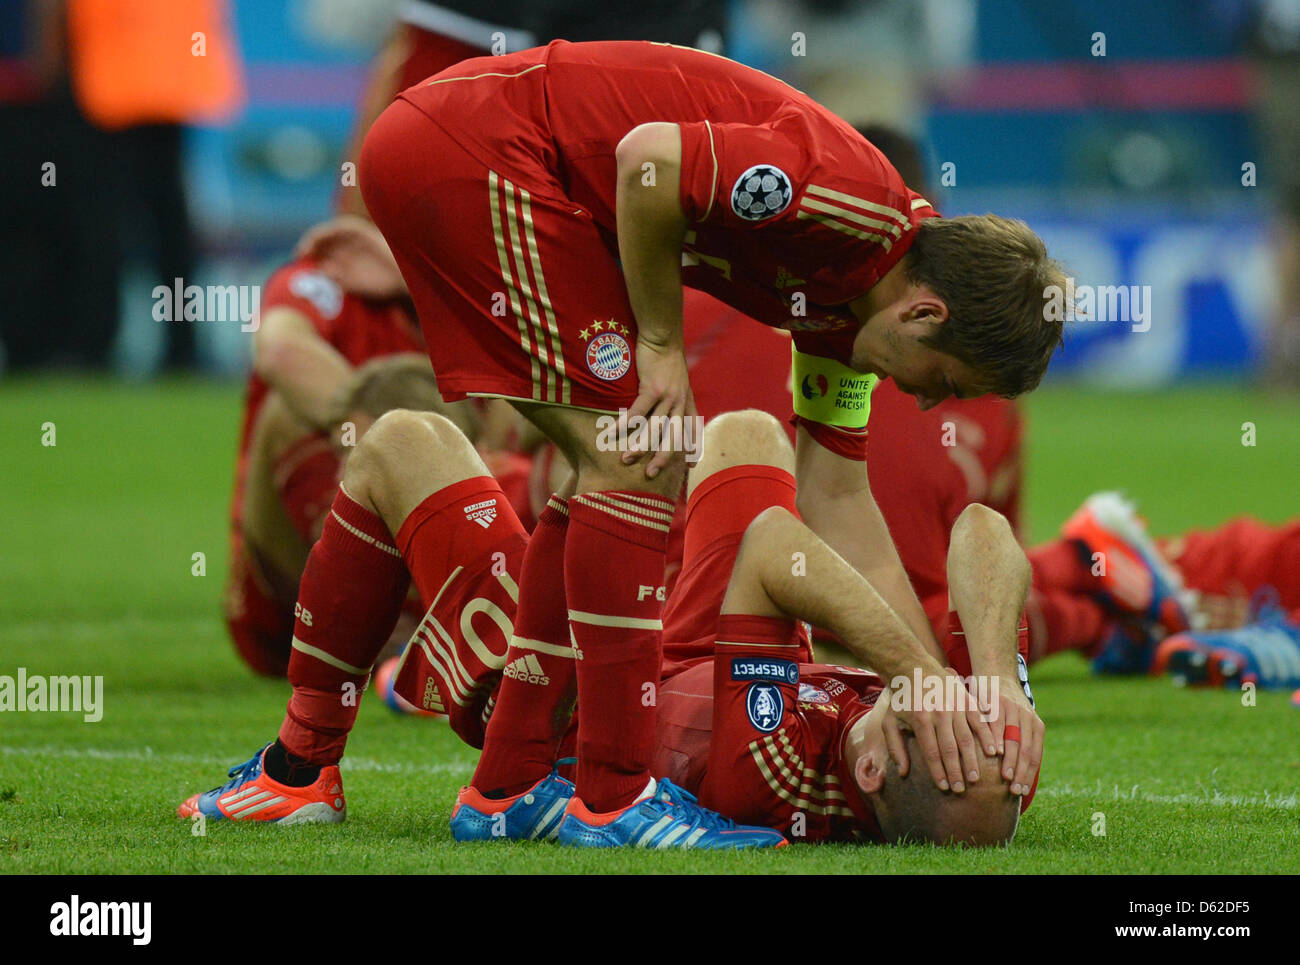 Munich's players Arjen Robben (down) and Philipp Lahm look dejected after losing the UEFA Champions League soccer final between FC Bayern Munich and FC Chelsea at Fußball Arena München in Munich, Germany, 19 May 2012. Photo: Marcus Brandt dpa/lby  +++(c) dpa - Bildfunk+++ Stock Photo